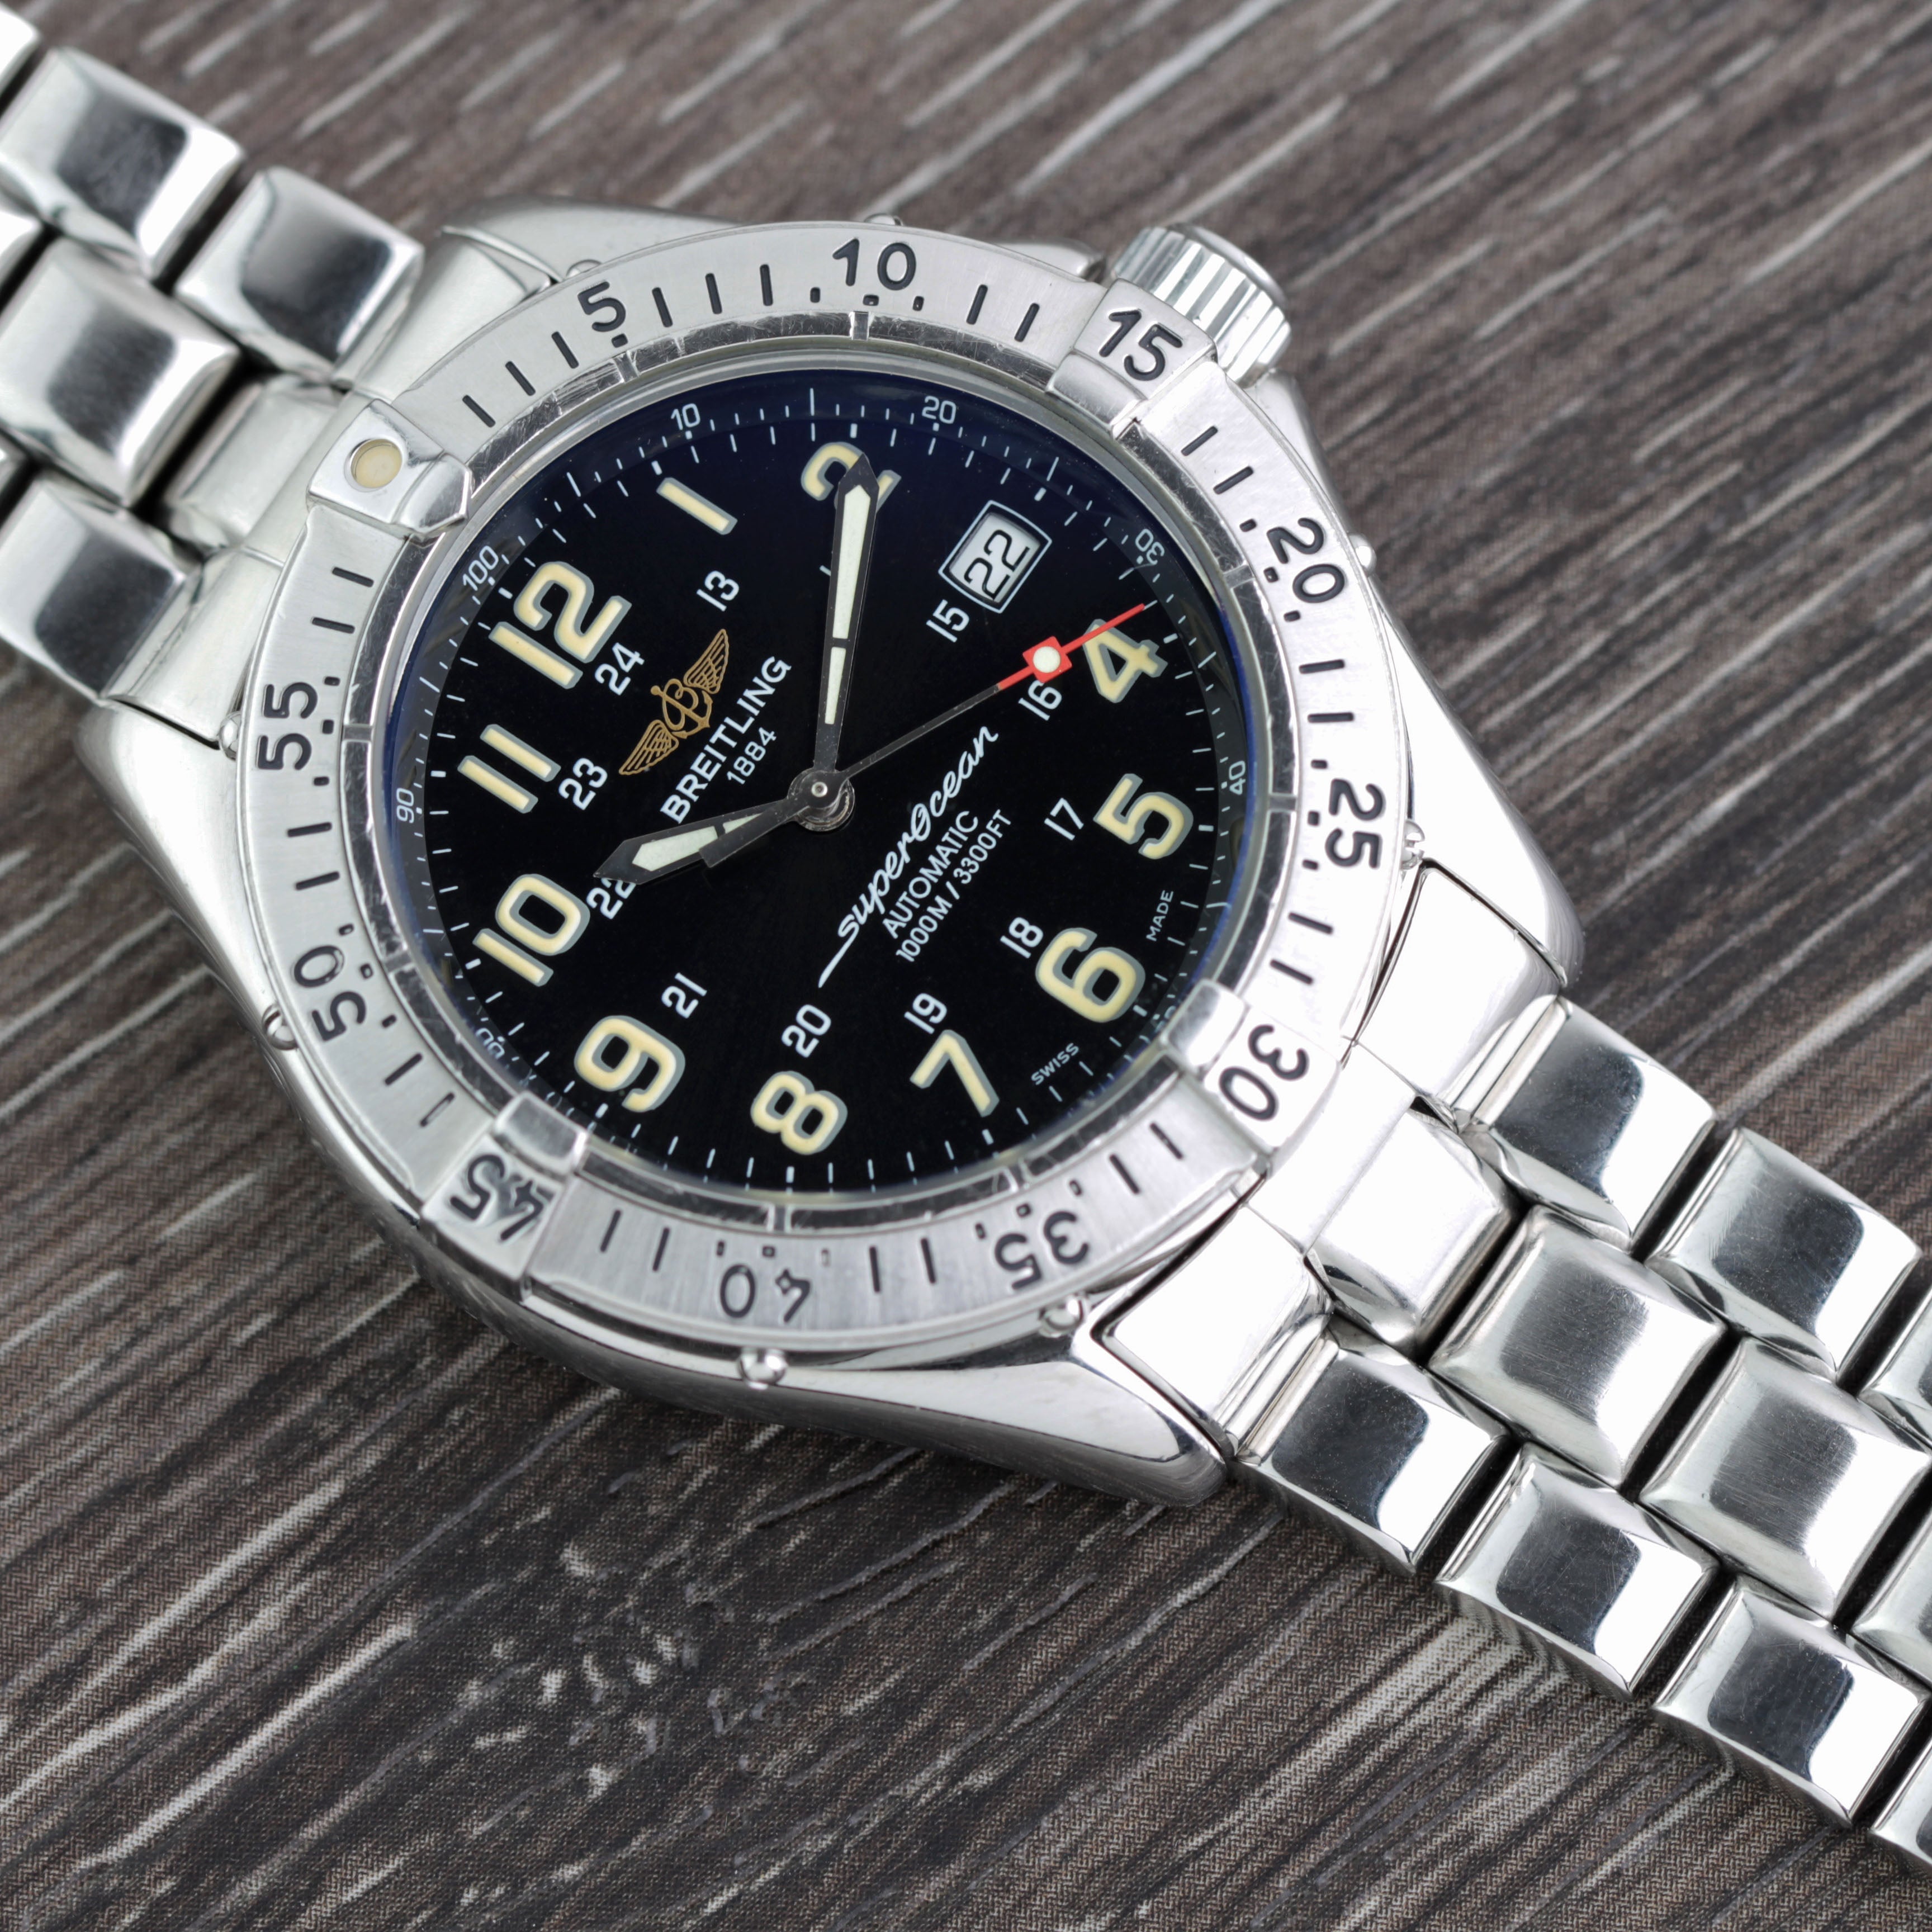 Breitling 1998 SuperOcean Automatic Ref.A17040